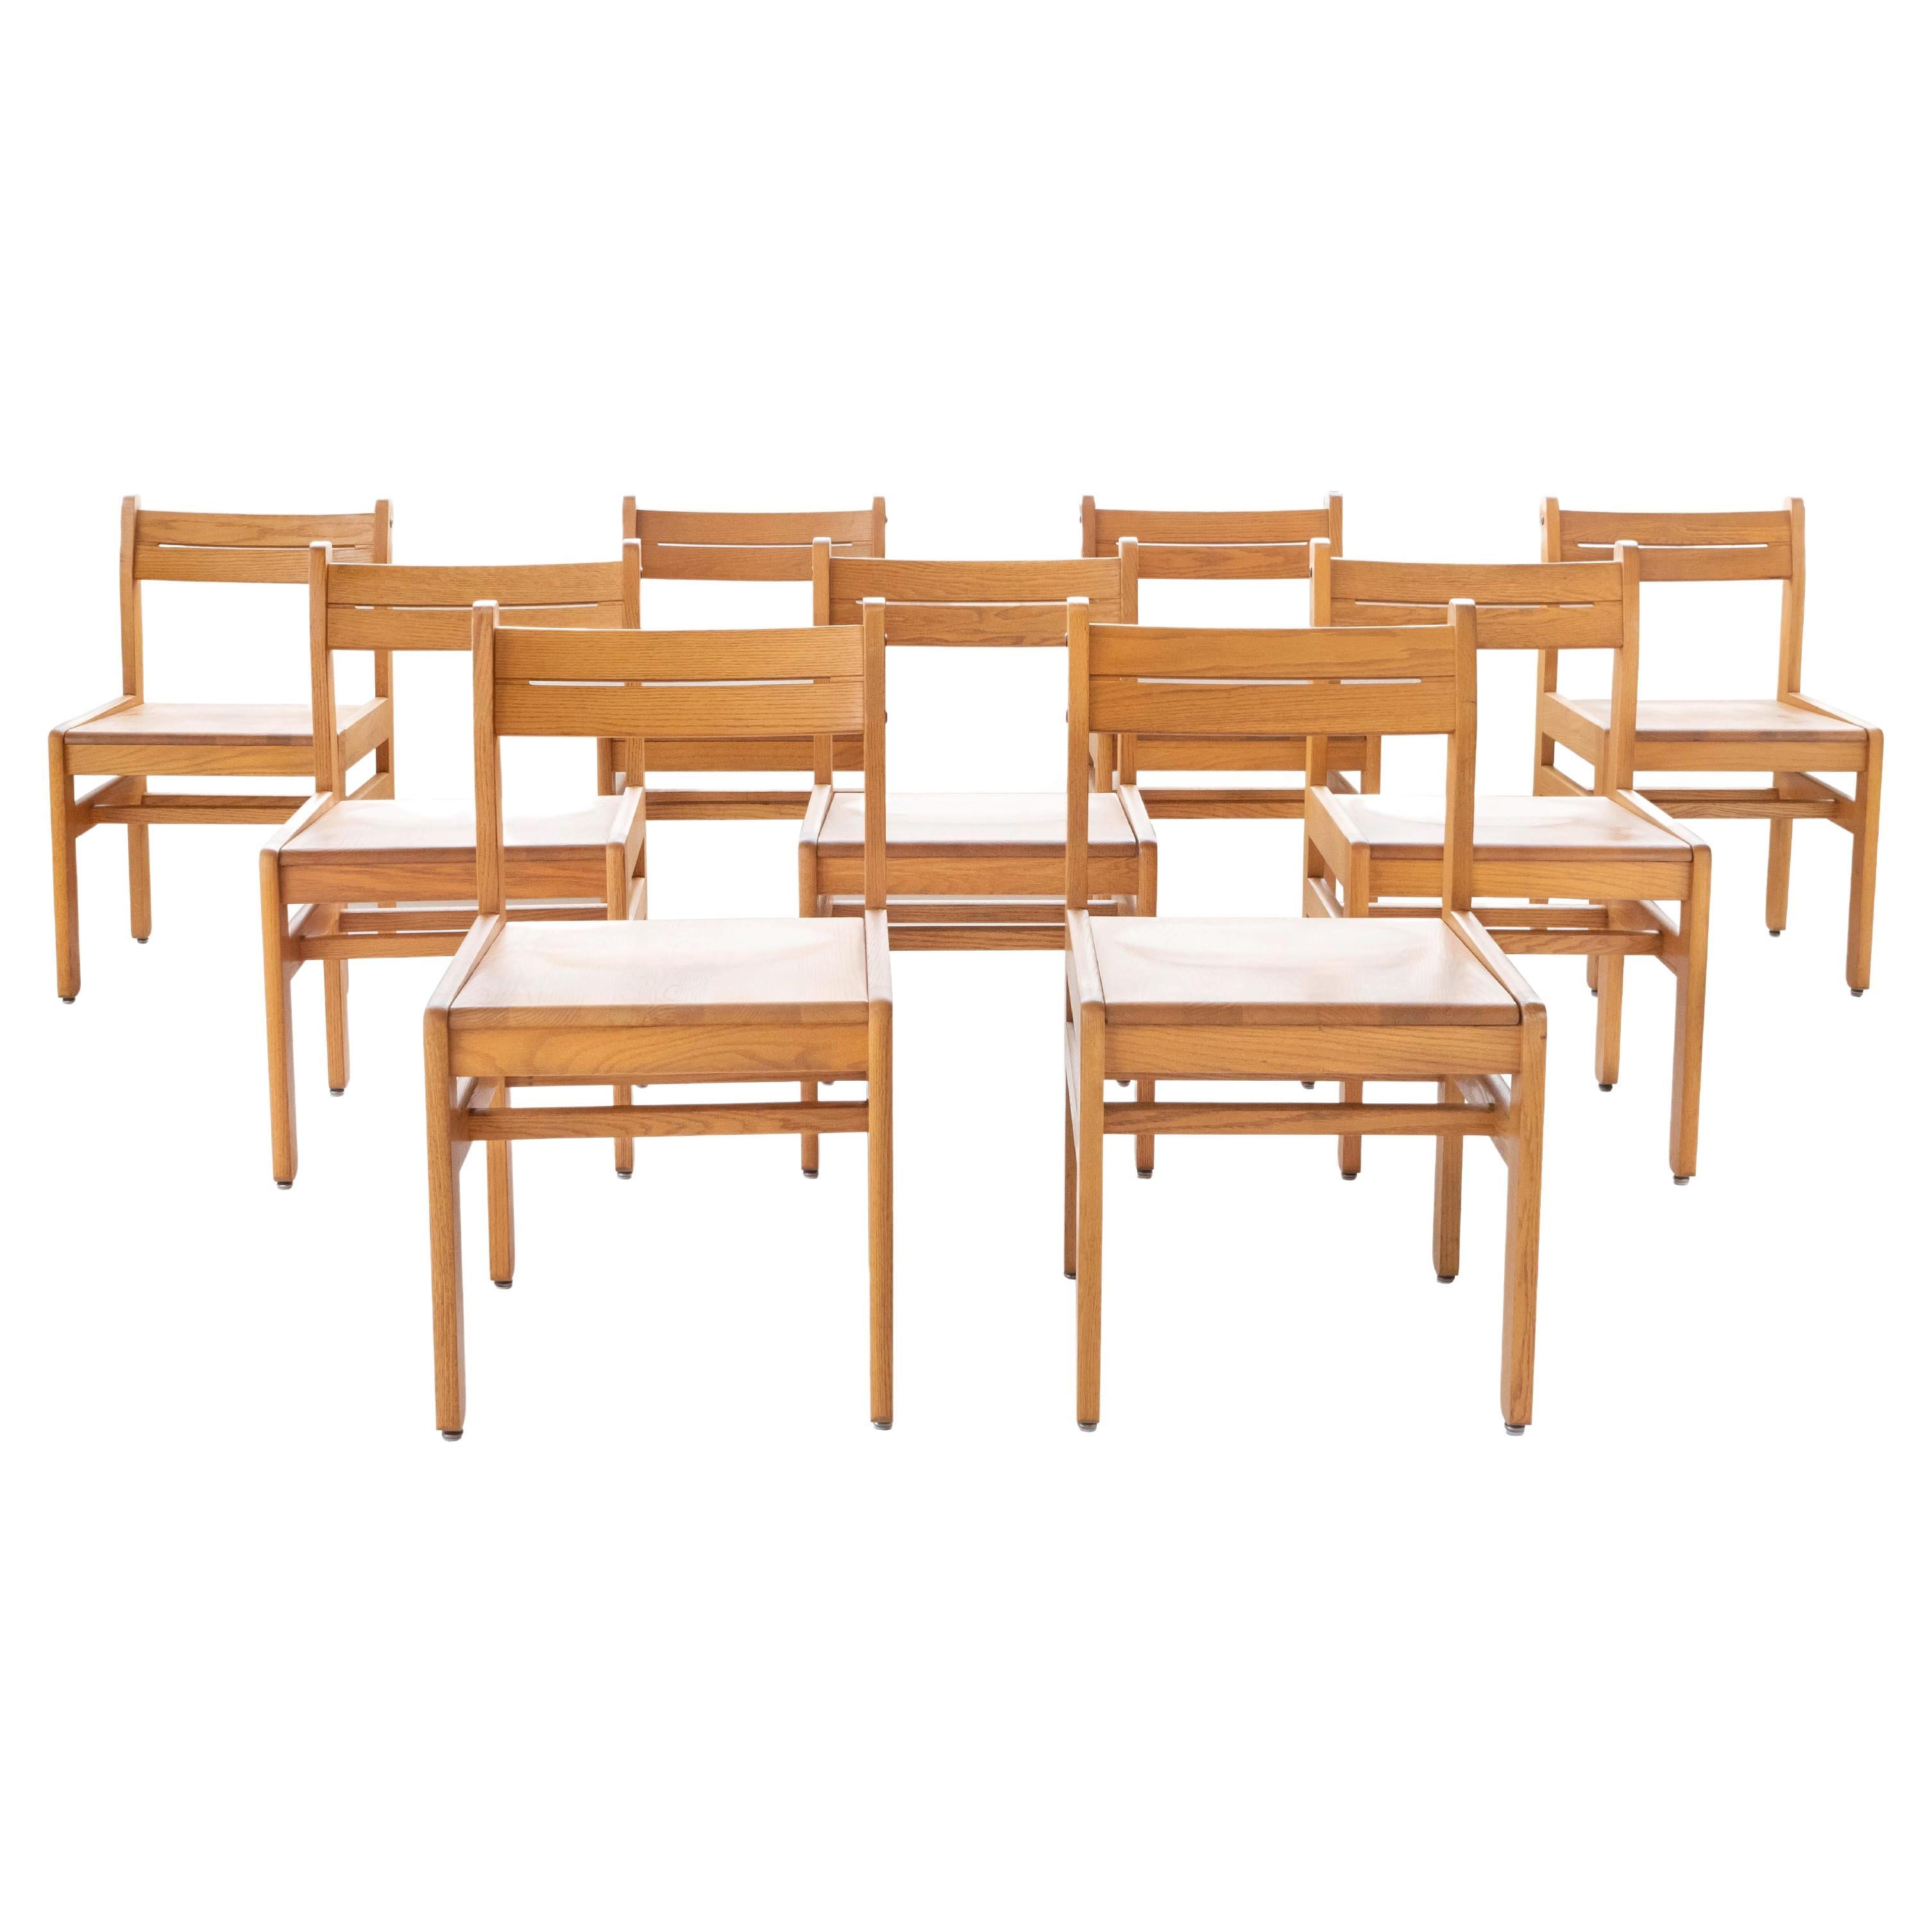 Solid Oak Post Modern Library Dining Chairs, Set of 9 Available